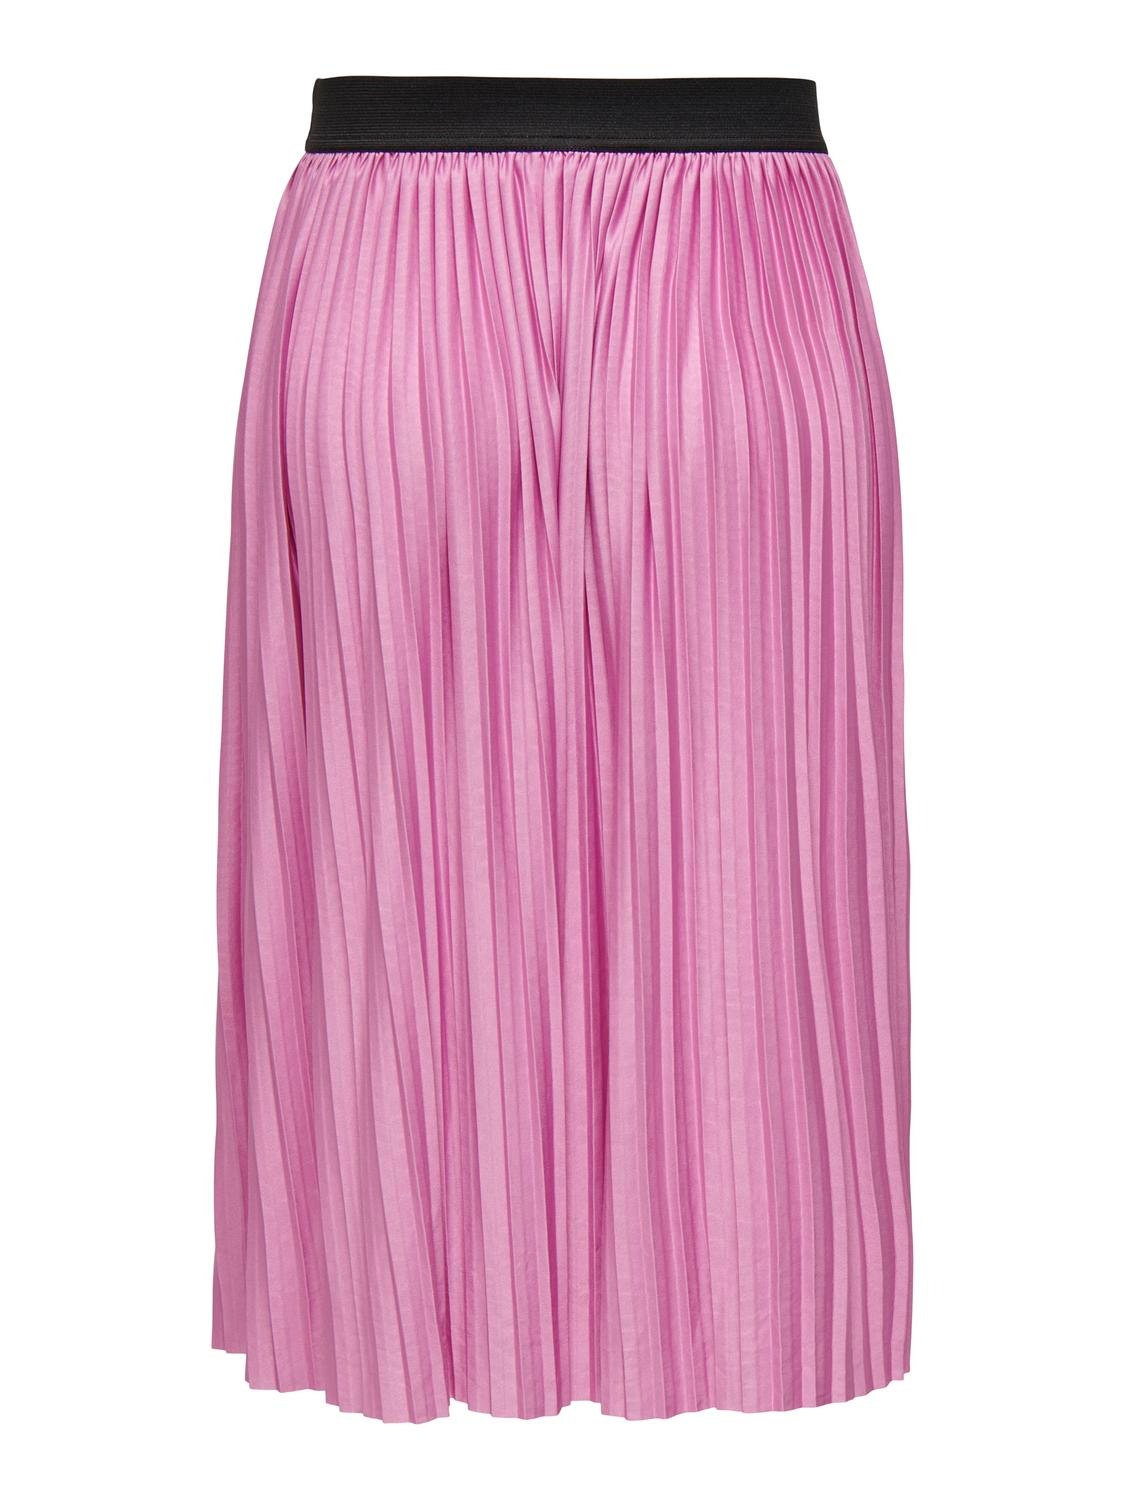 ONLY Pleated Midi skirt -Cyclamen - 15206814